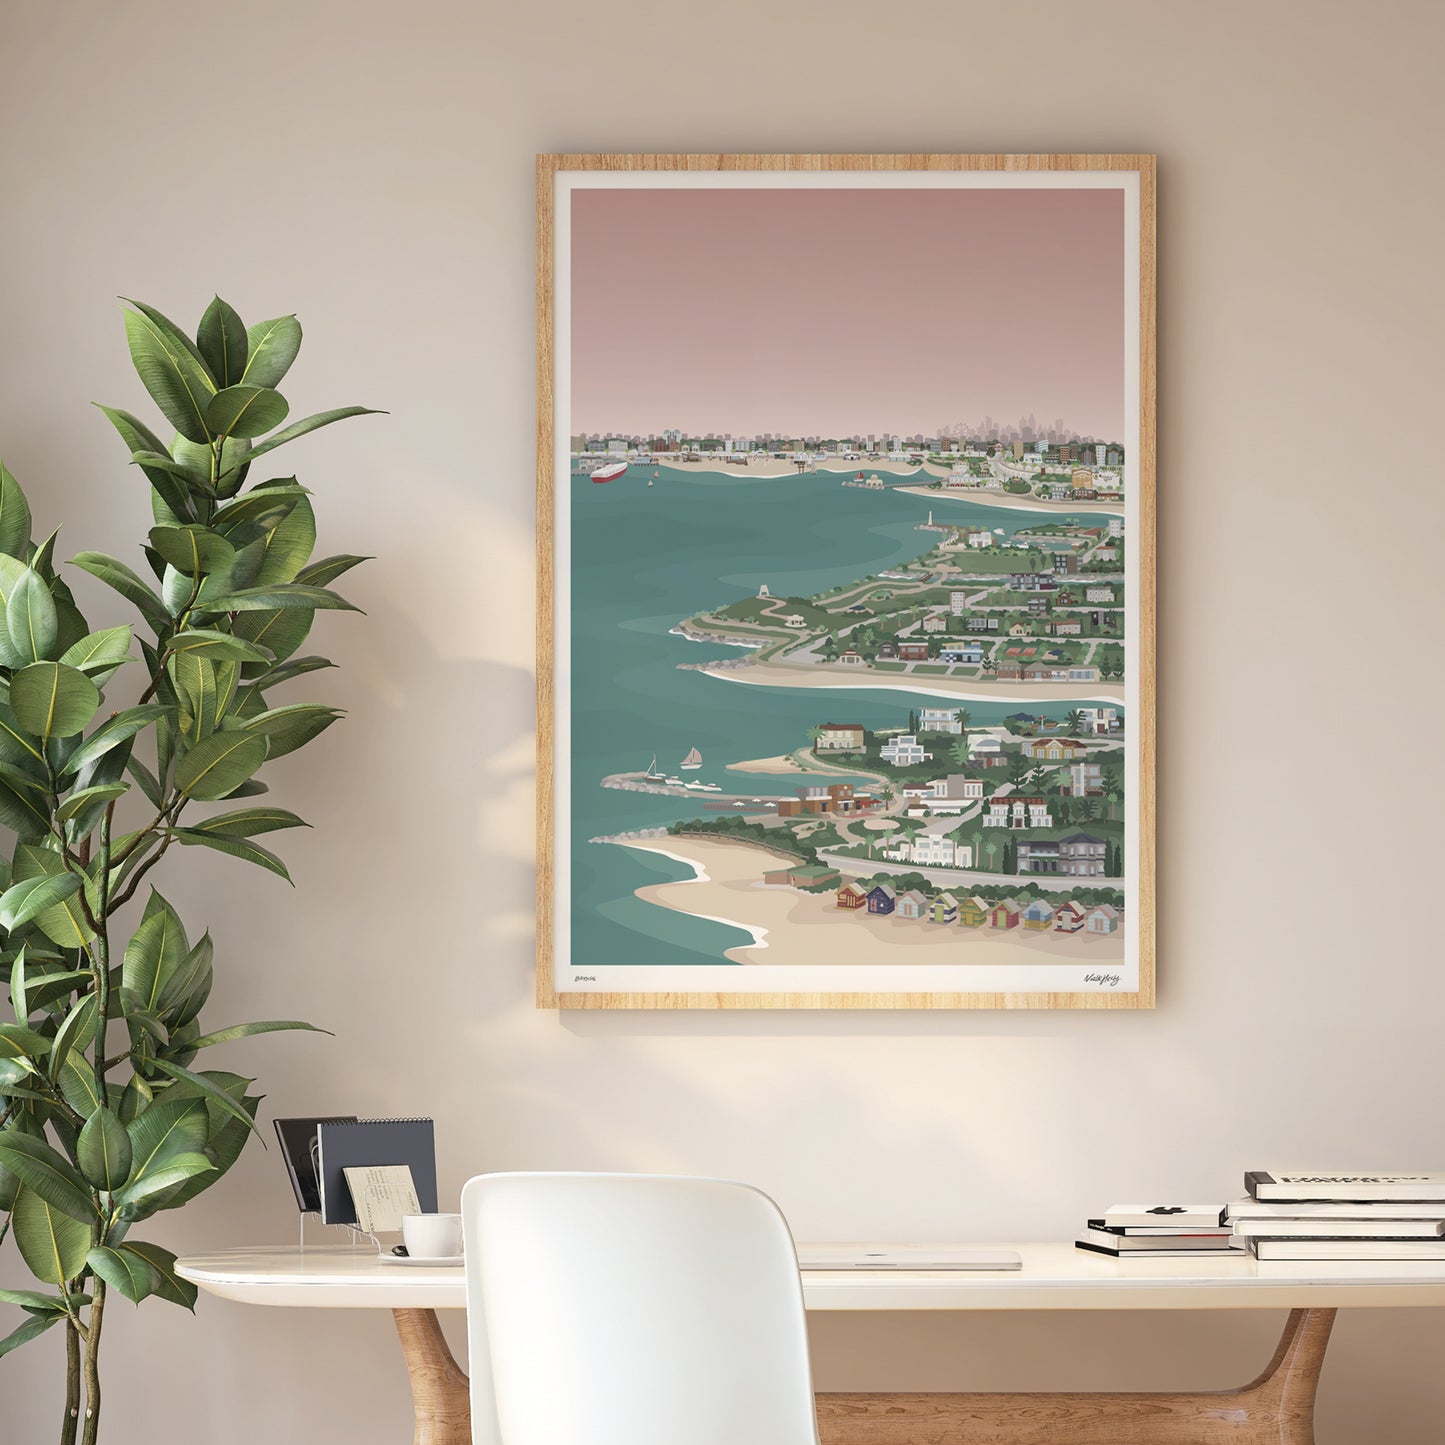 Large framed colourful art print of bayside Melbourne from Princes pier to Brighton bathing boxes hanging on a wall over a desk